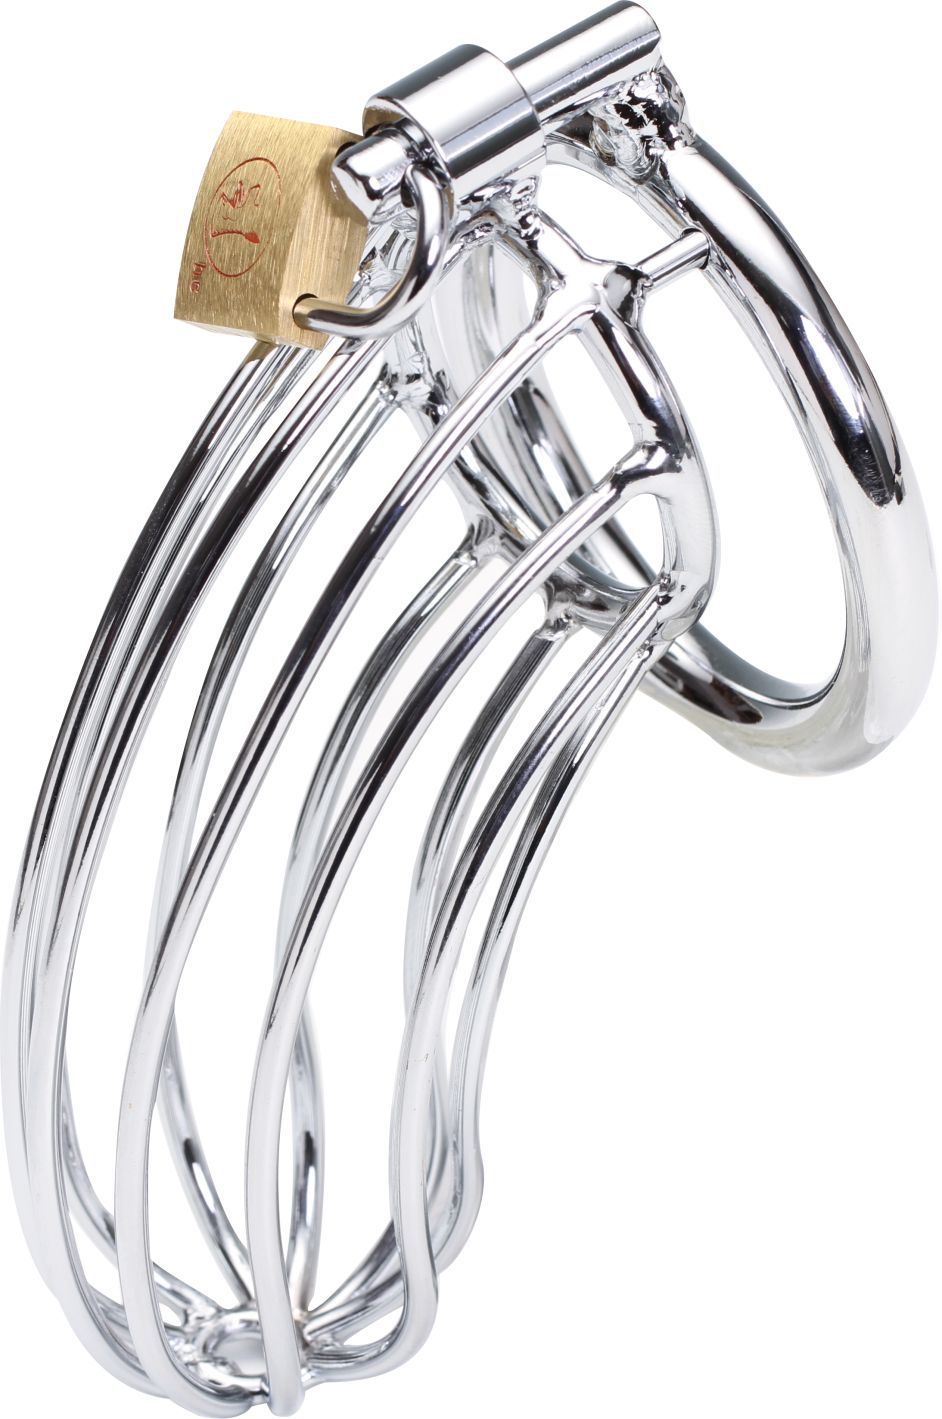 2015 New Sexy Male Chastity Cage Device Stainless Steel Penis Cock Cage Ring Toys for Man